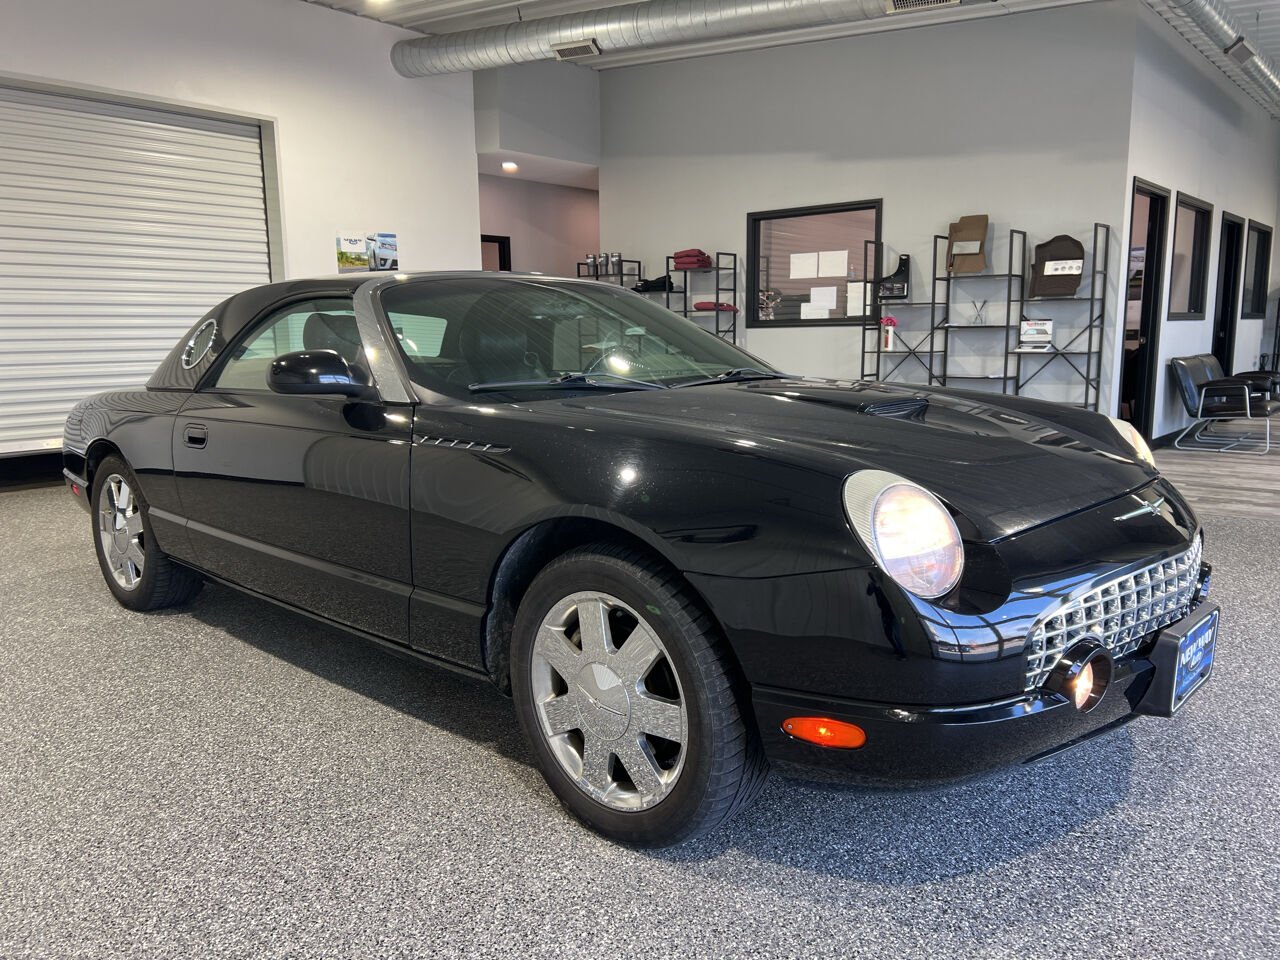 Used 2002 Ford Thunderbird Premium with VIN 1FAHP60A62Y128375 for sale in Jefferson, IA